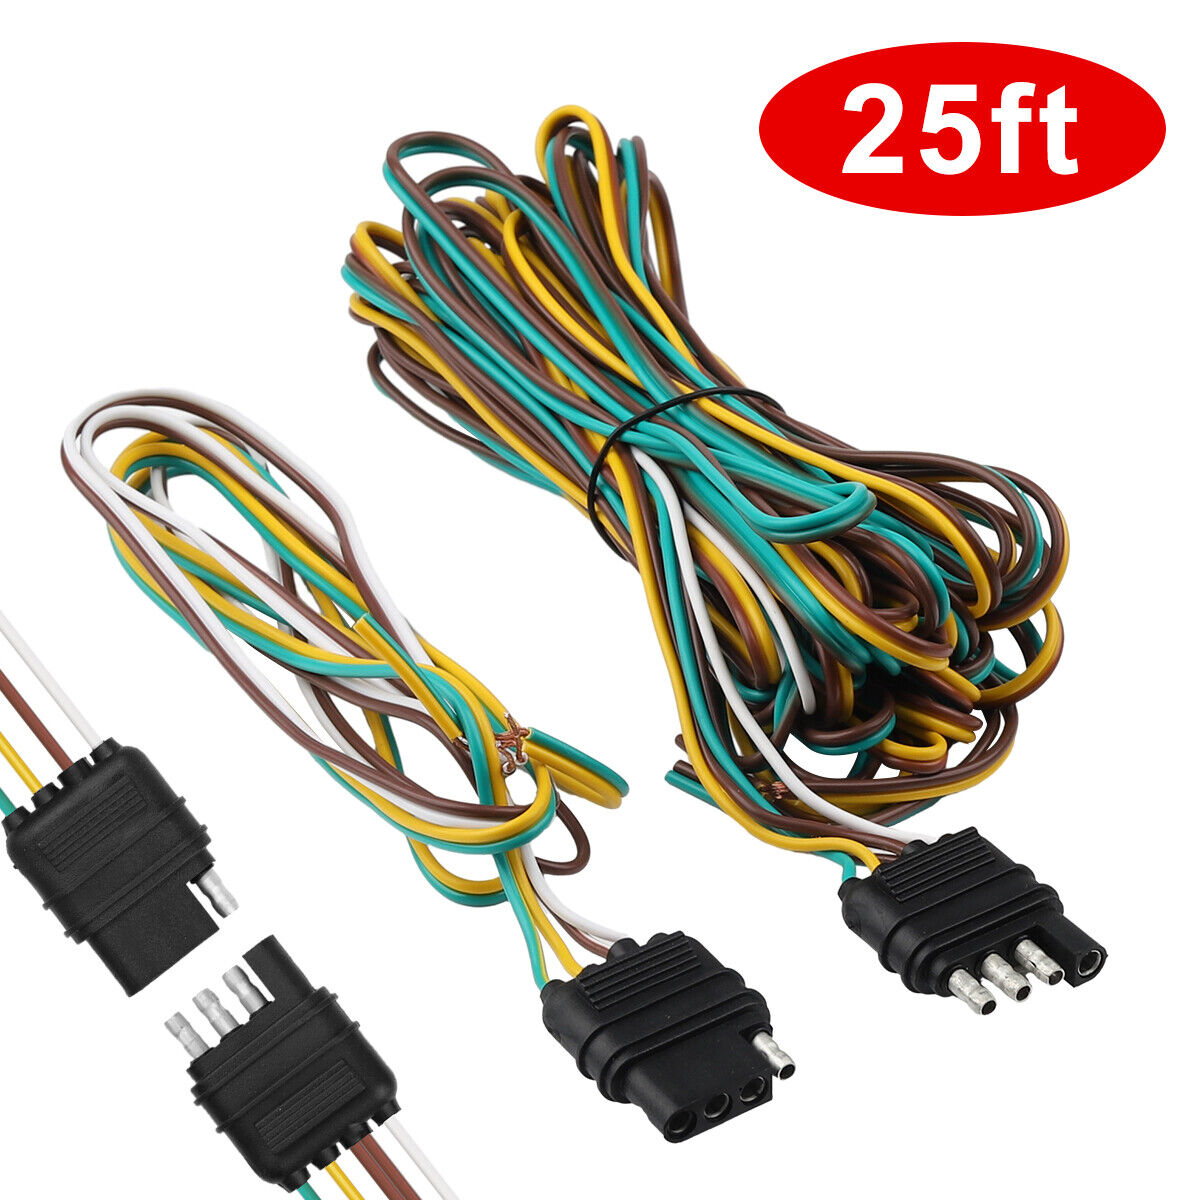 25' 4 Pin Flat Trailer Wiring Harness Kit Wishbone Style for Trailer Tail Lights